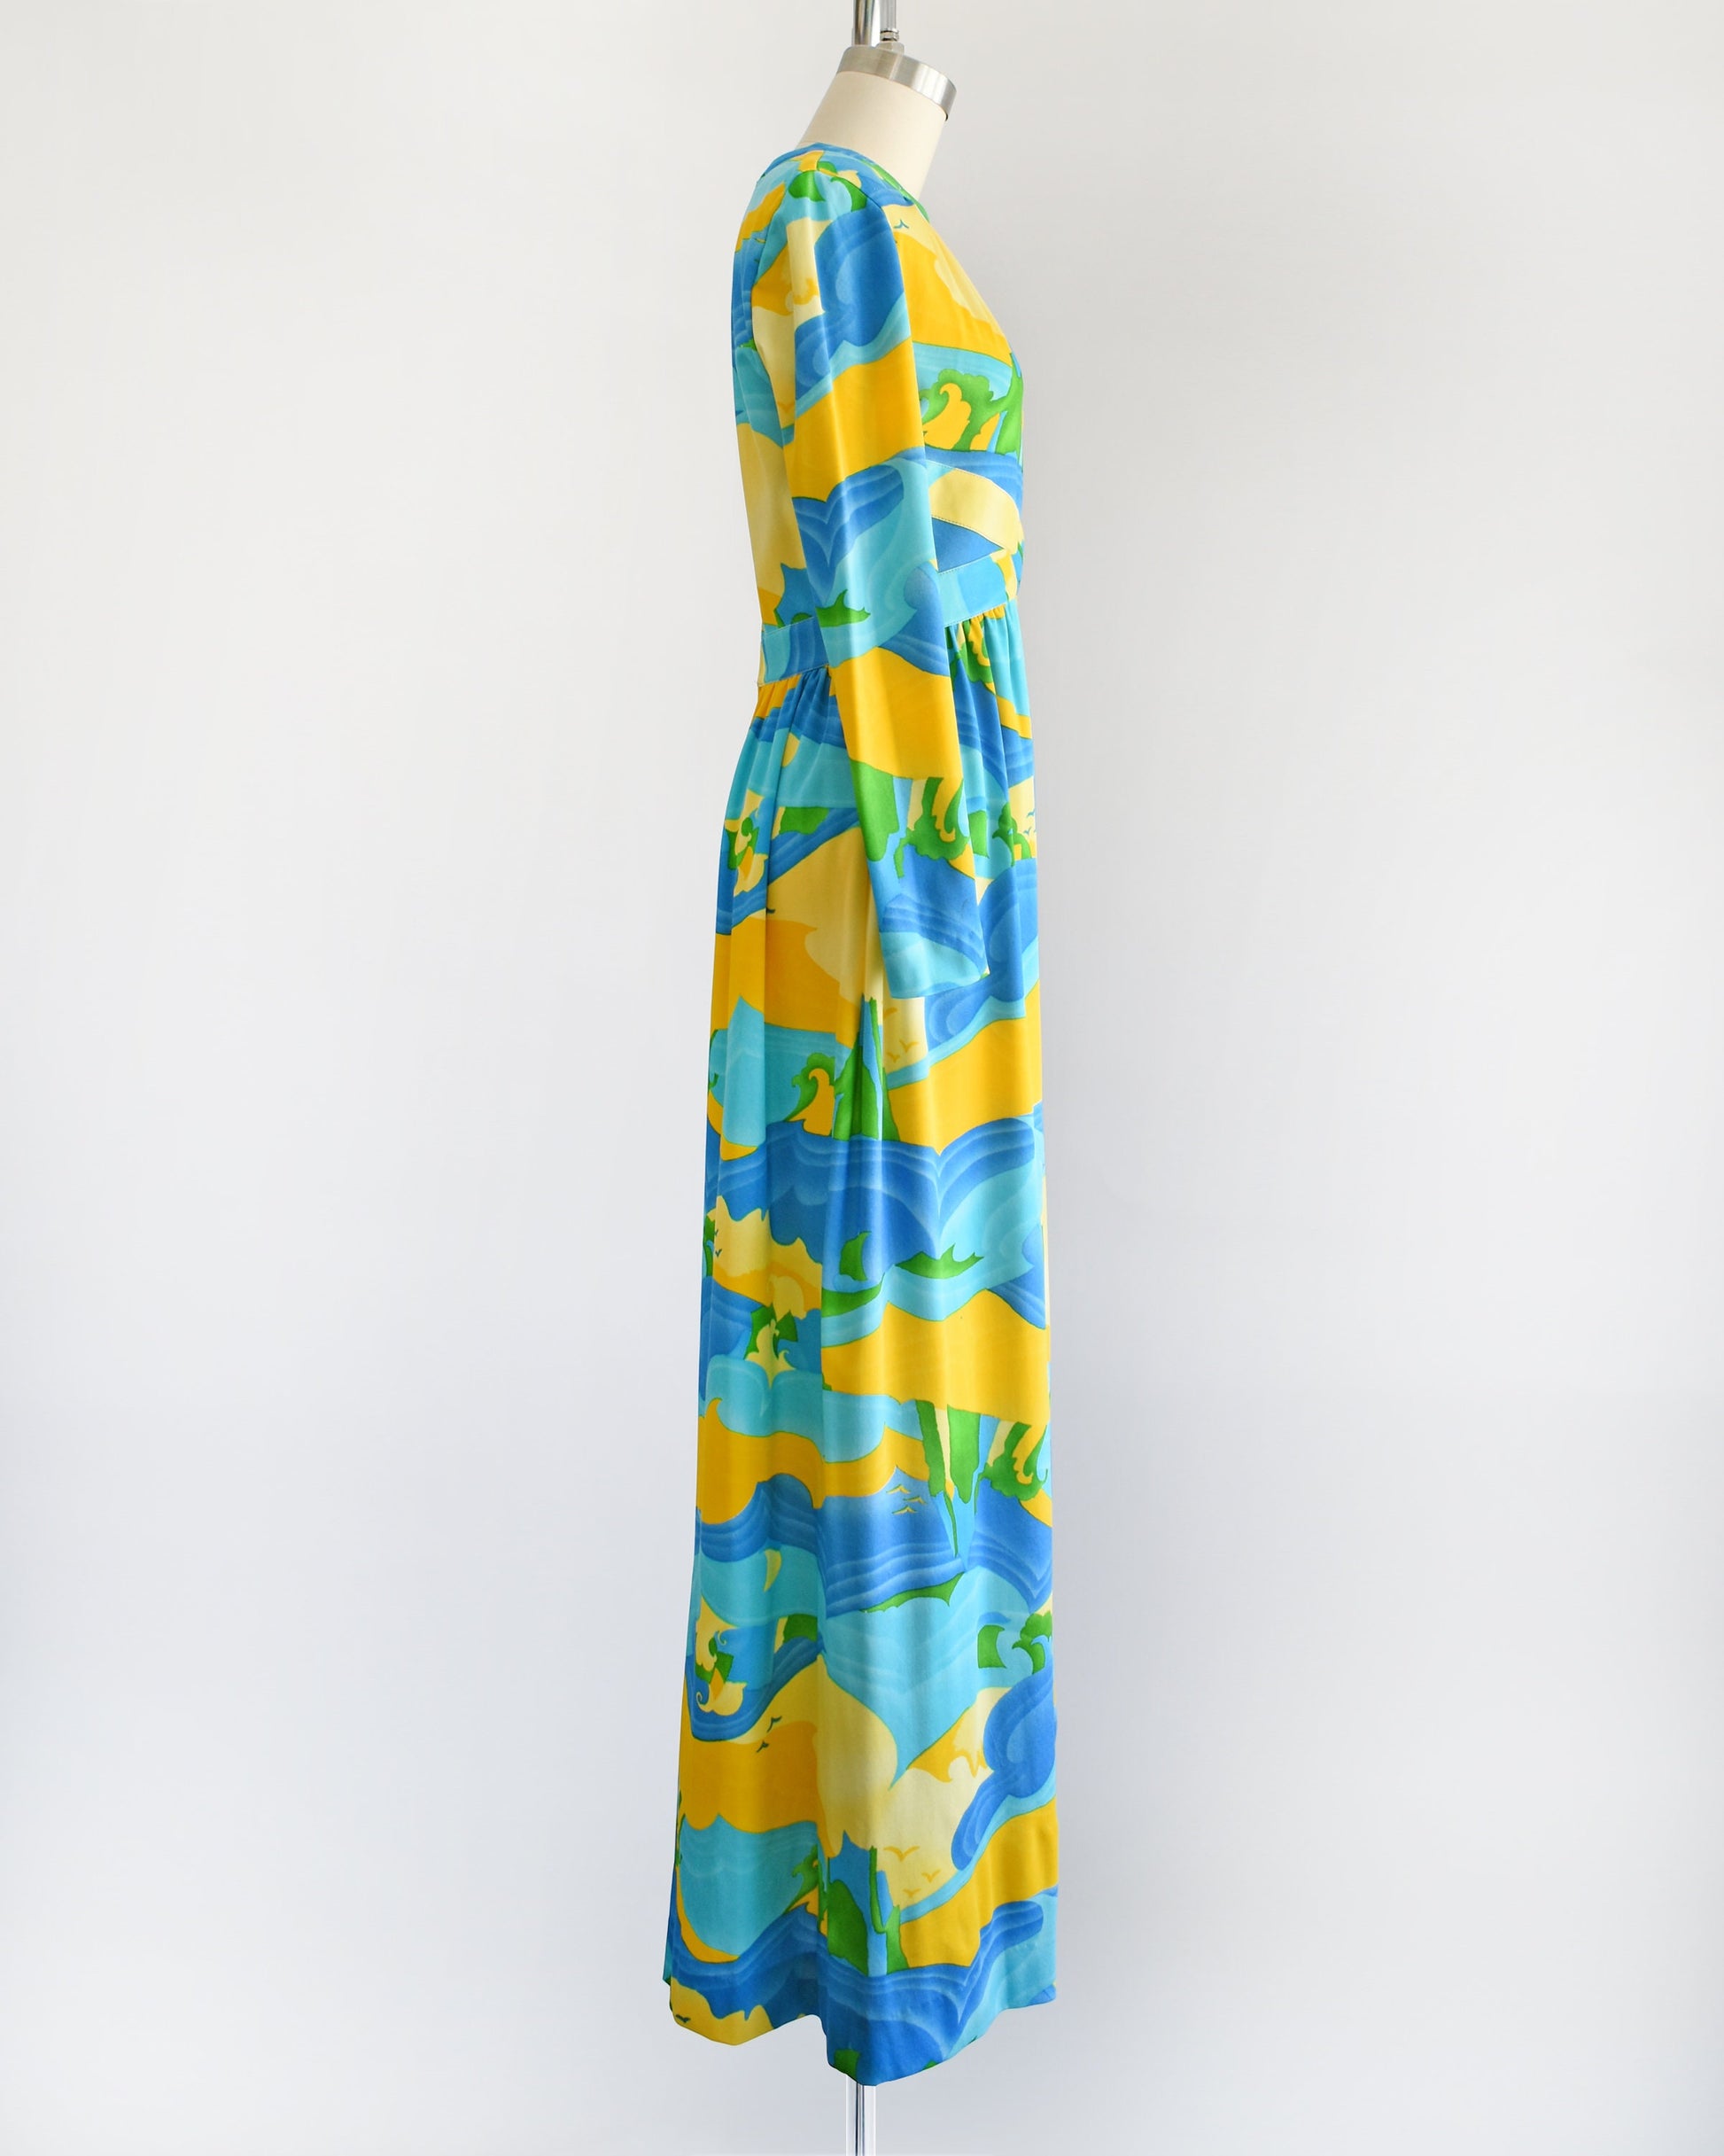 Side view of a vintage 70s maxi dress with a blue, yellow, and green ocean landscape print that has sea, sand, and sky, with greenery in the back and birds in the sky. The dress has long sleeves and is on a dress form.